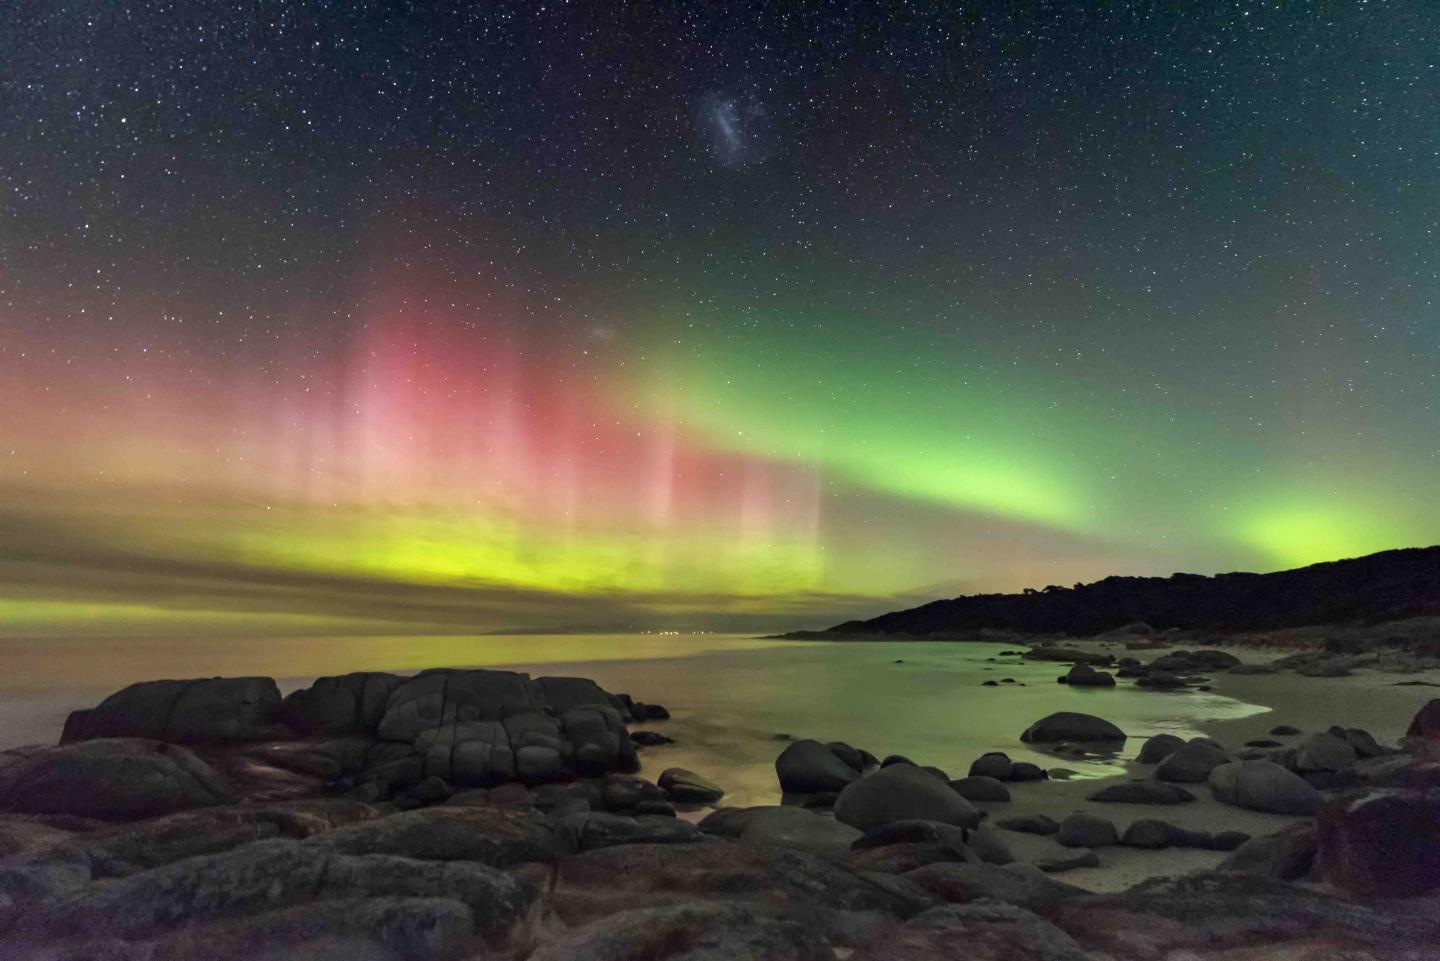 Aurora Australis from Beerbarrel Beach by James Stone, Insight Investment Astronomy Photographer of the Year 2019